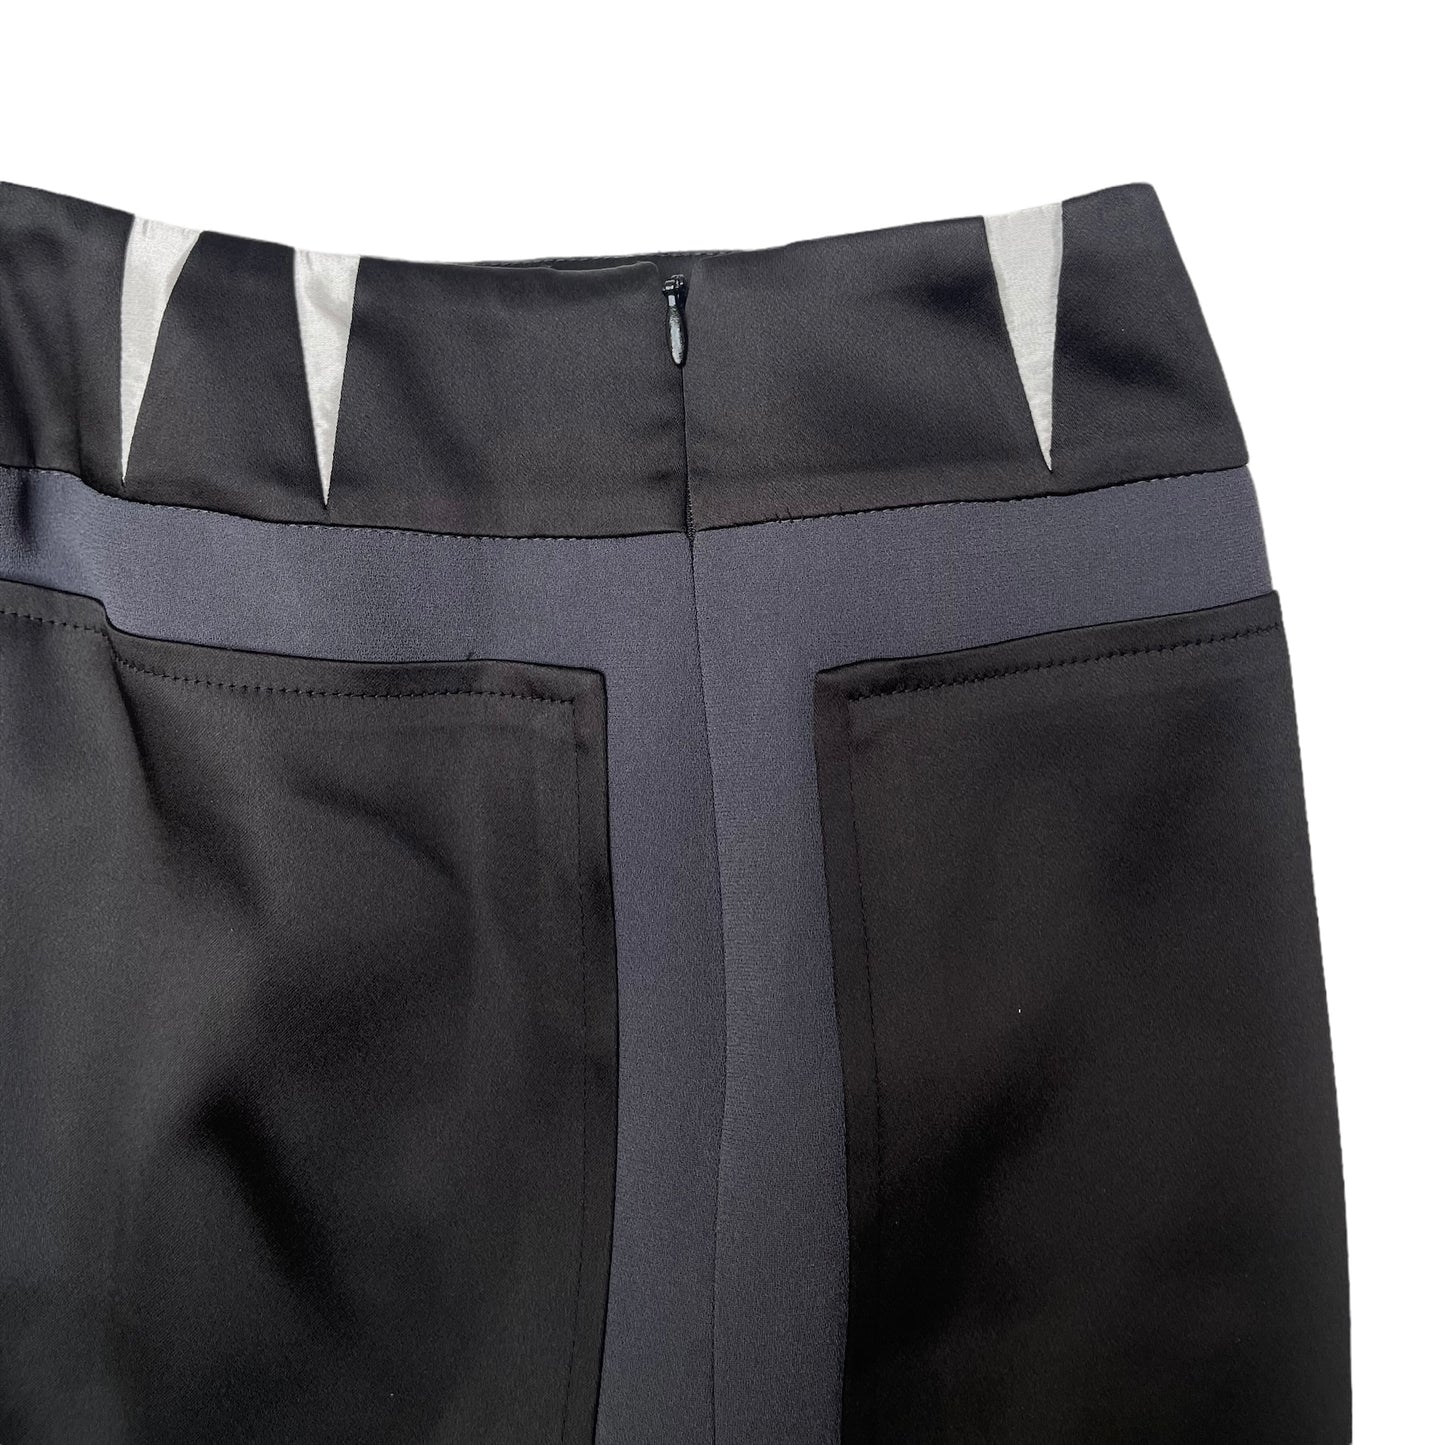 Black and Grey Skirt - S